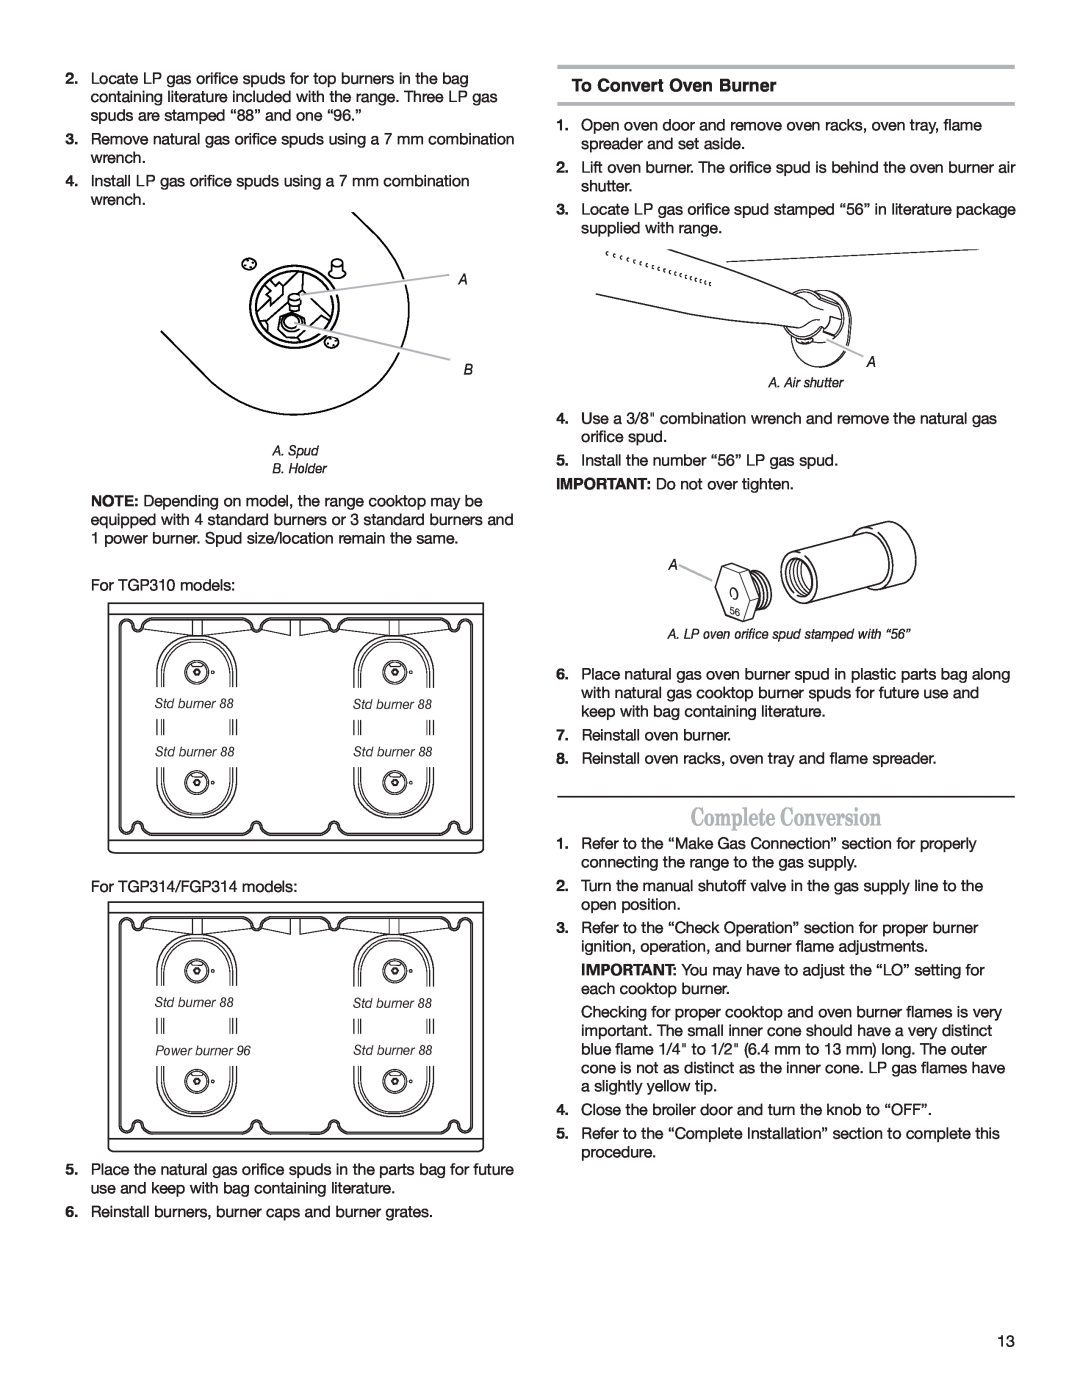 Whirlpool W10153329A installation instructions Complete Conversion, To Convert Oven Burner 